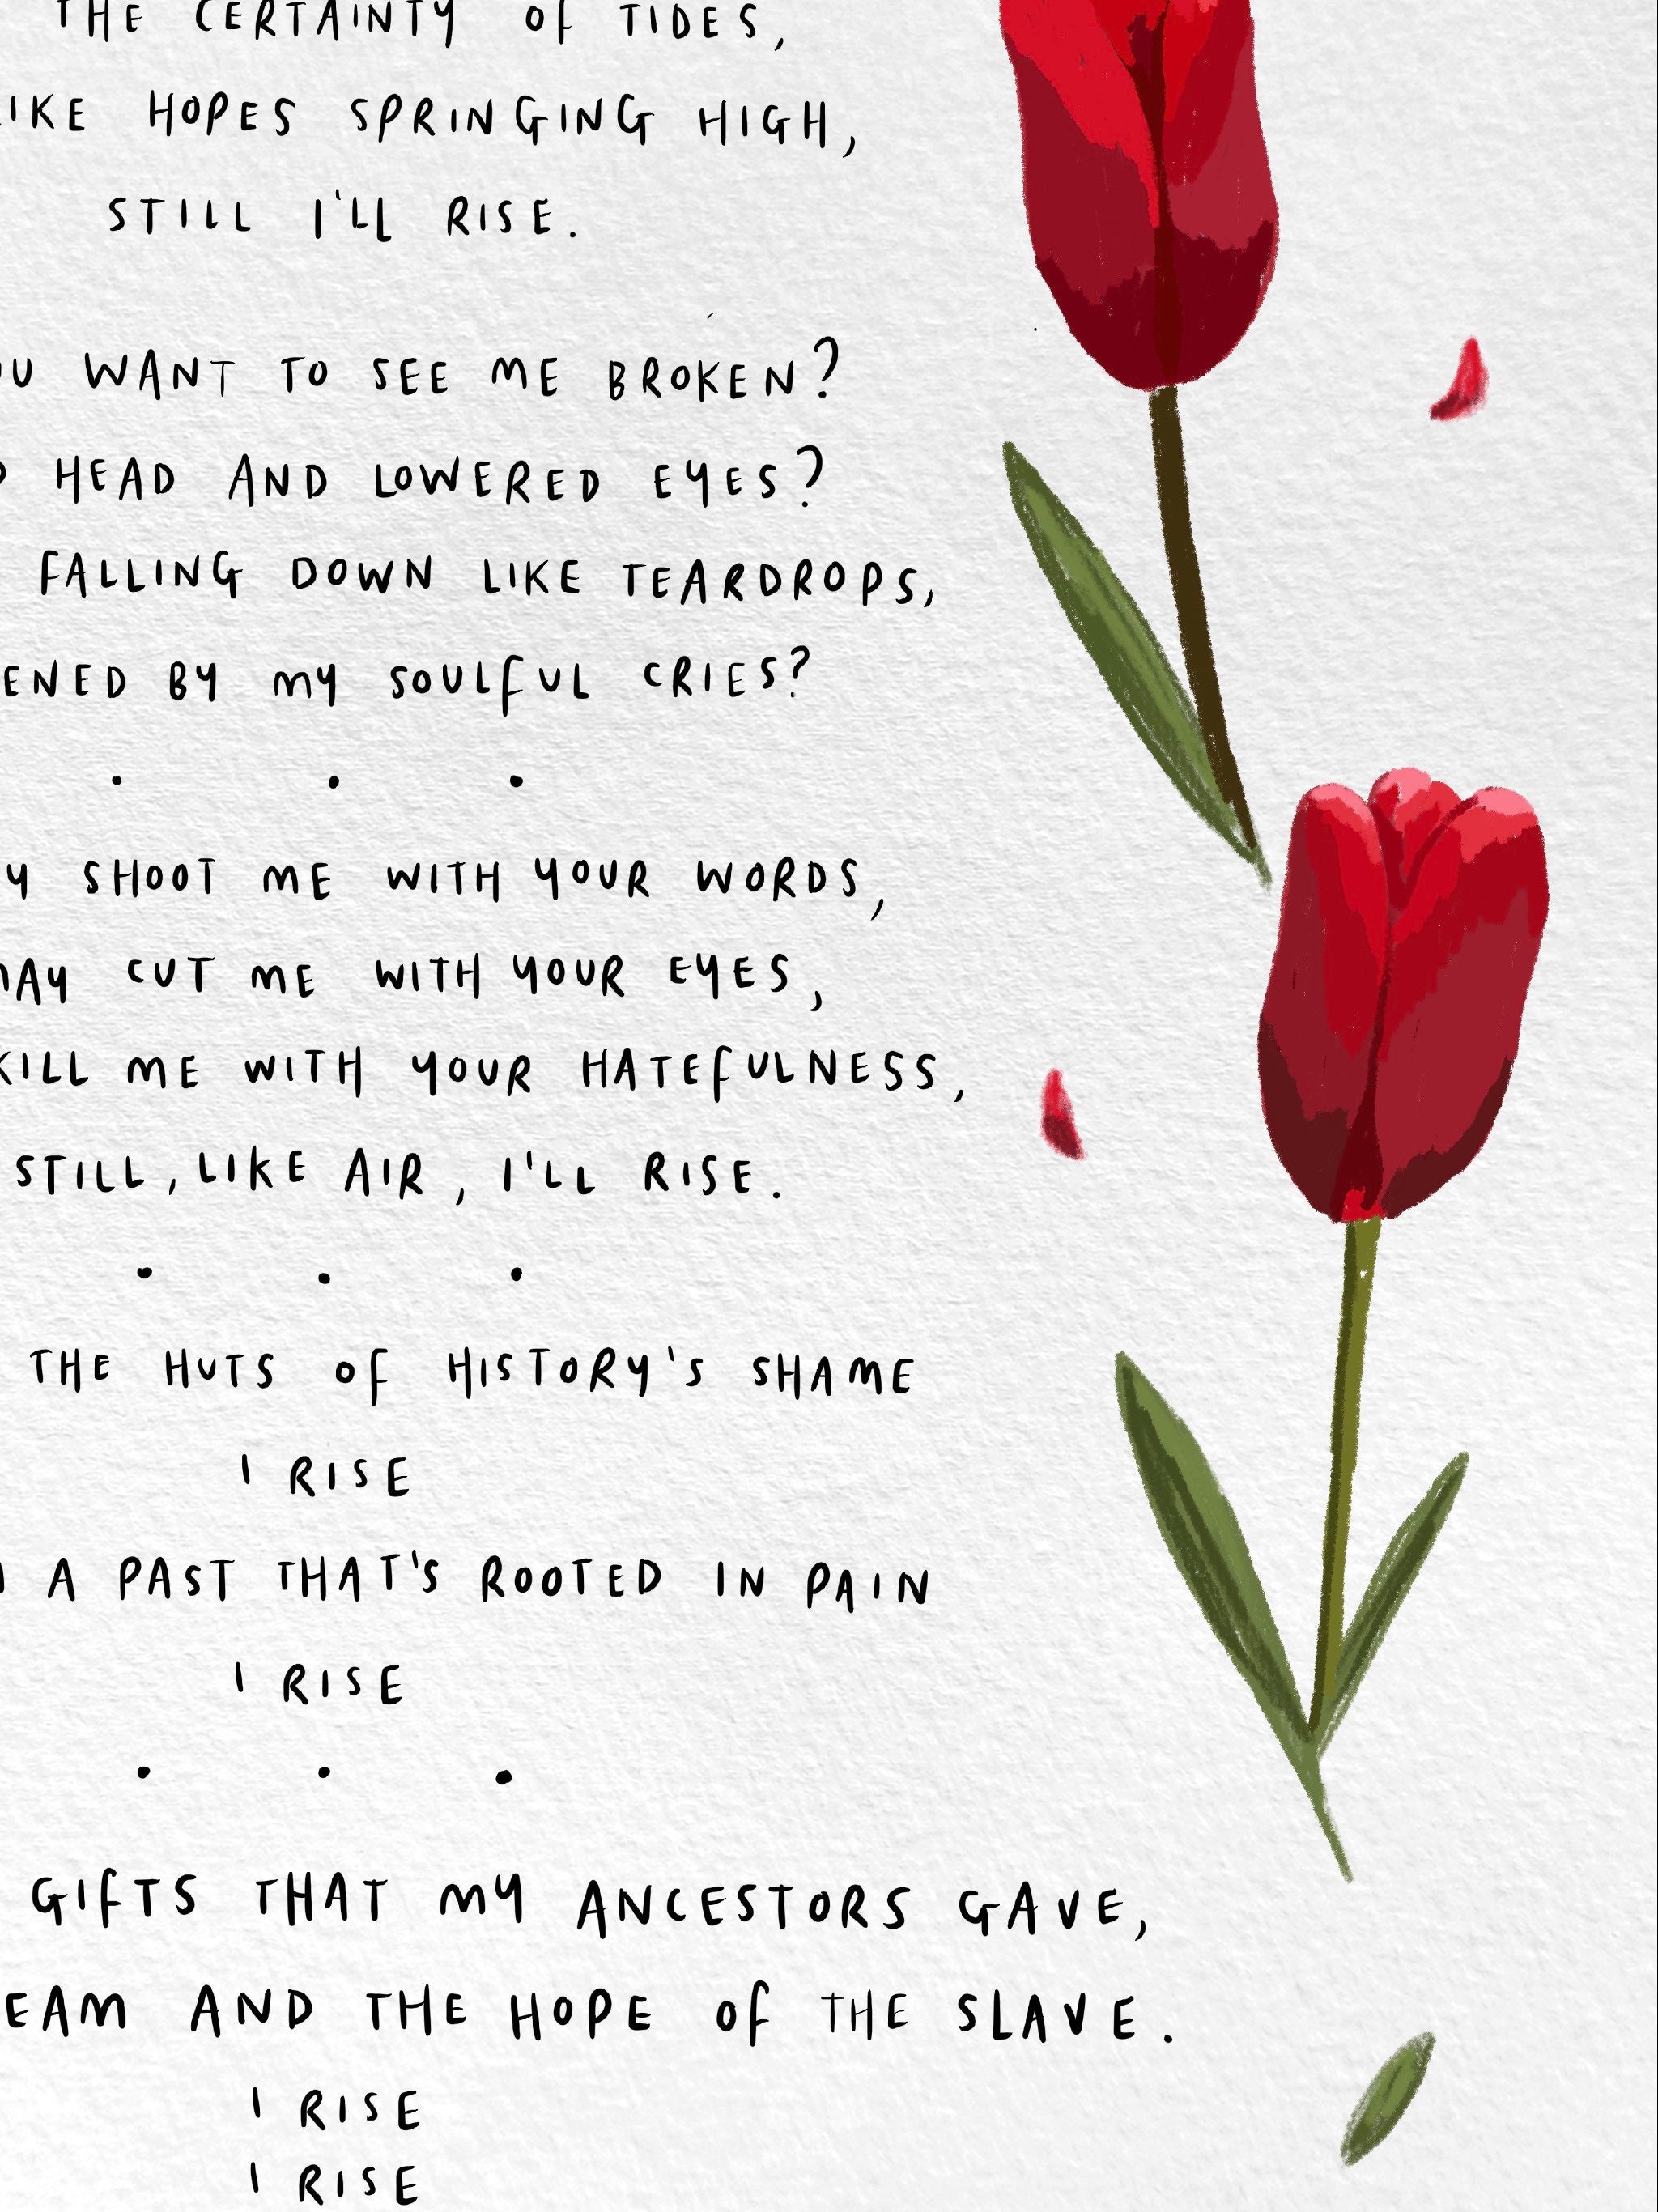 Buy Still, I Rise by Maya Angelou / Strength Wisdom Poem Art Print Poster  Women Girls Daughter Rose Inspirational Empowering Flowers Quote Online in  India 